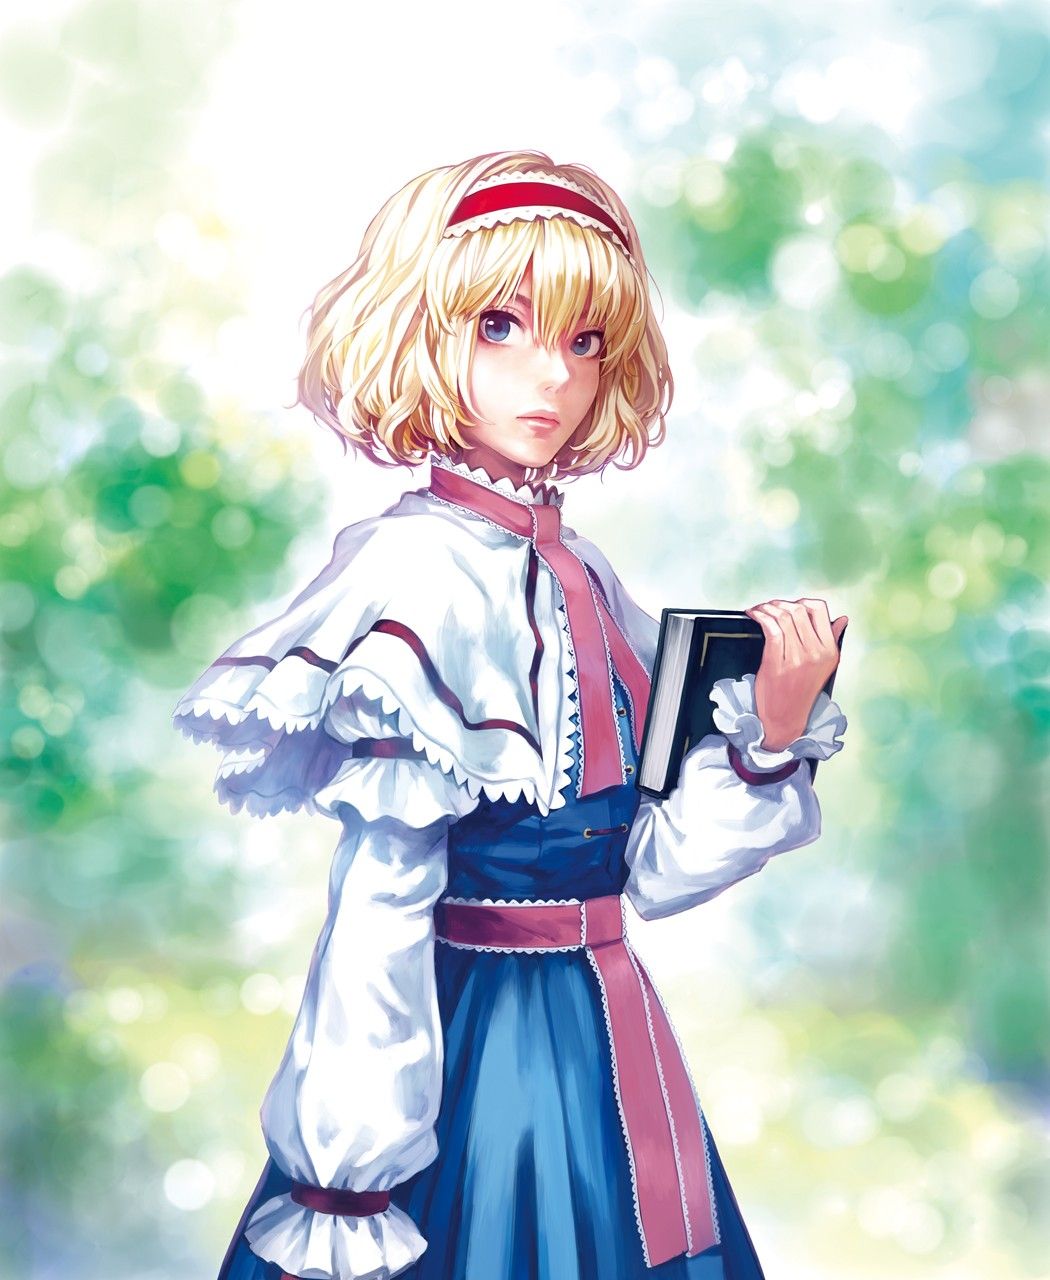 blondes, video games, Touhou, dress, blue eyes, lips, outdoors